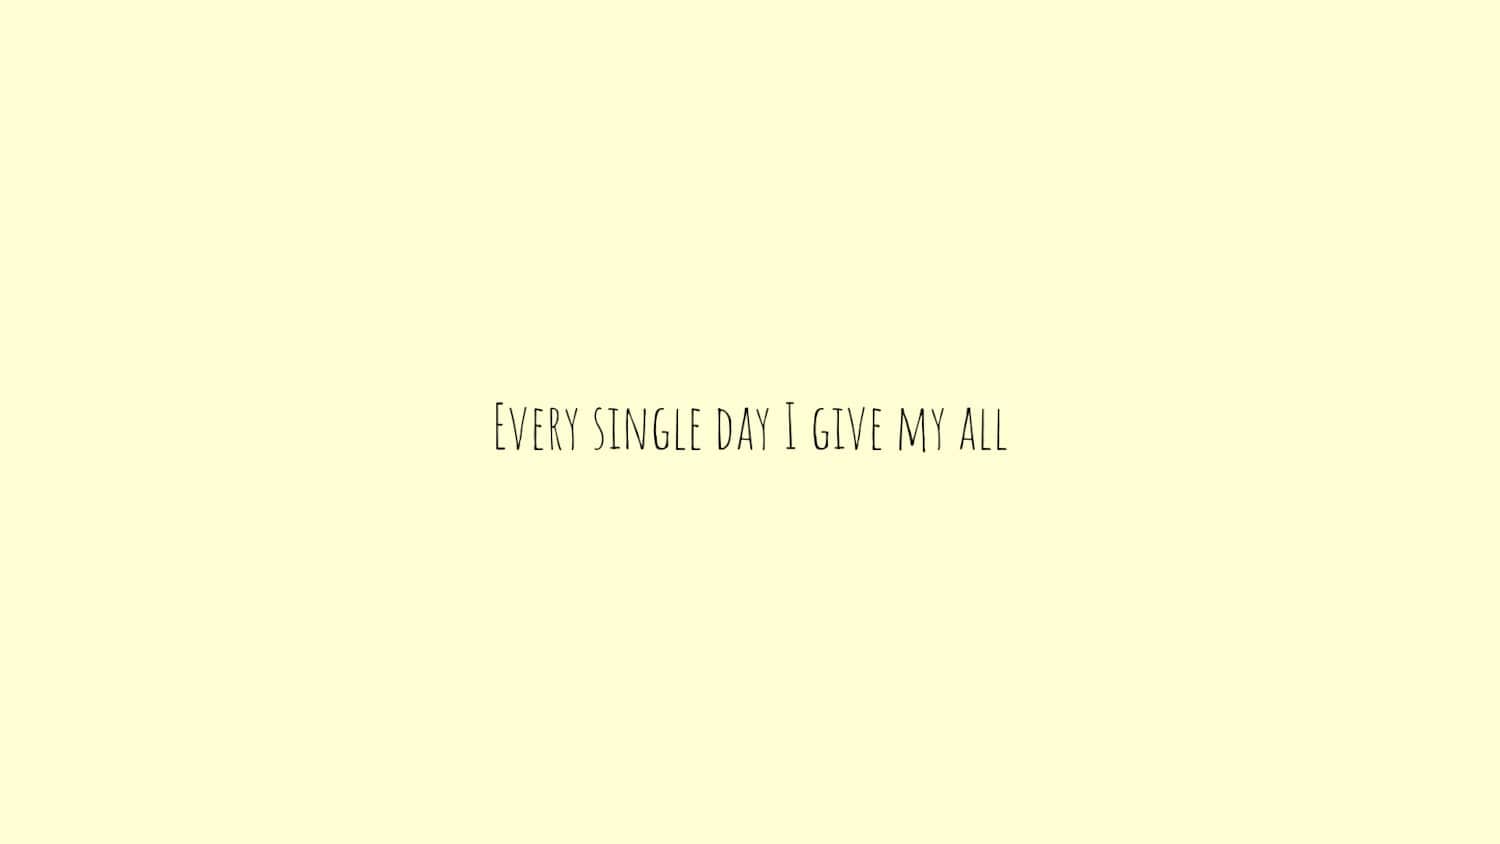 Every single day I give my all